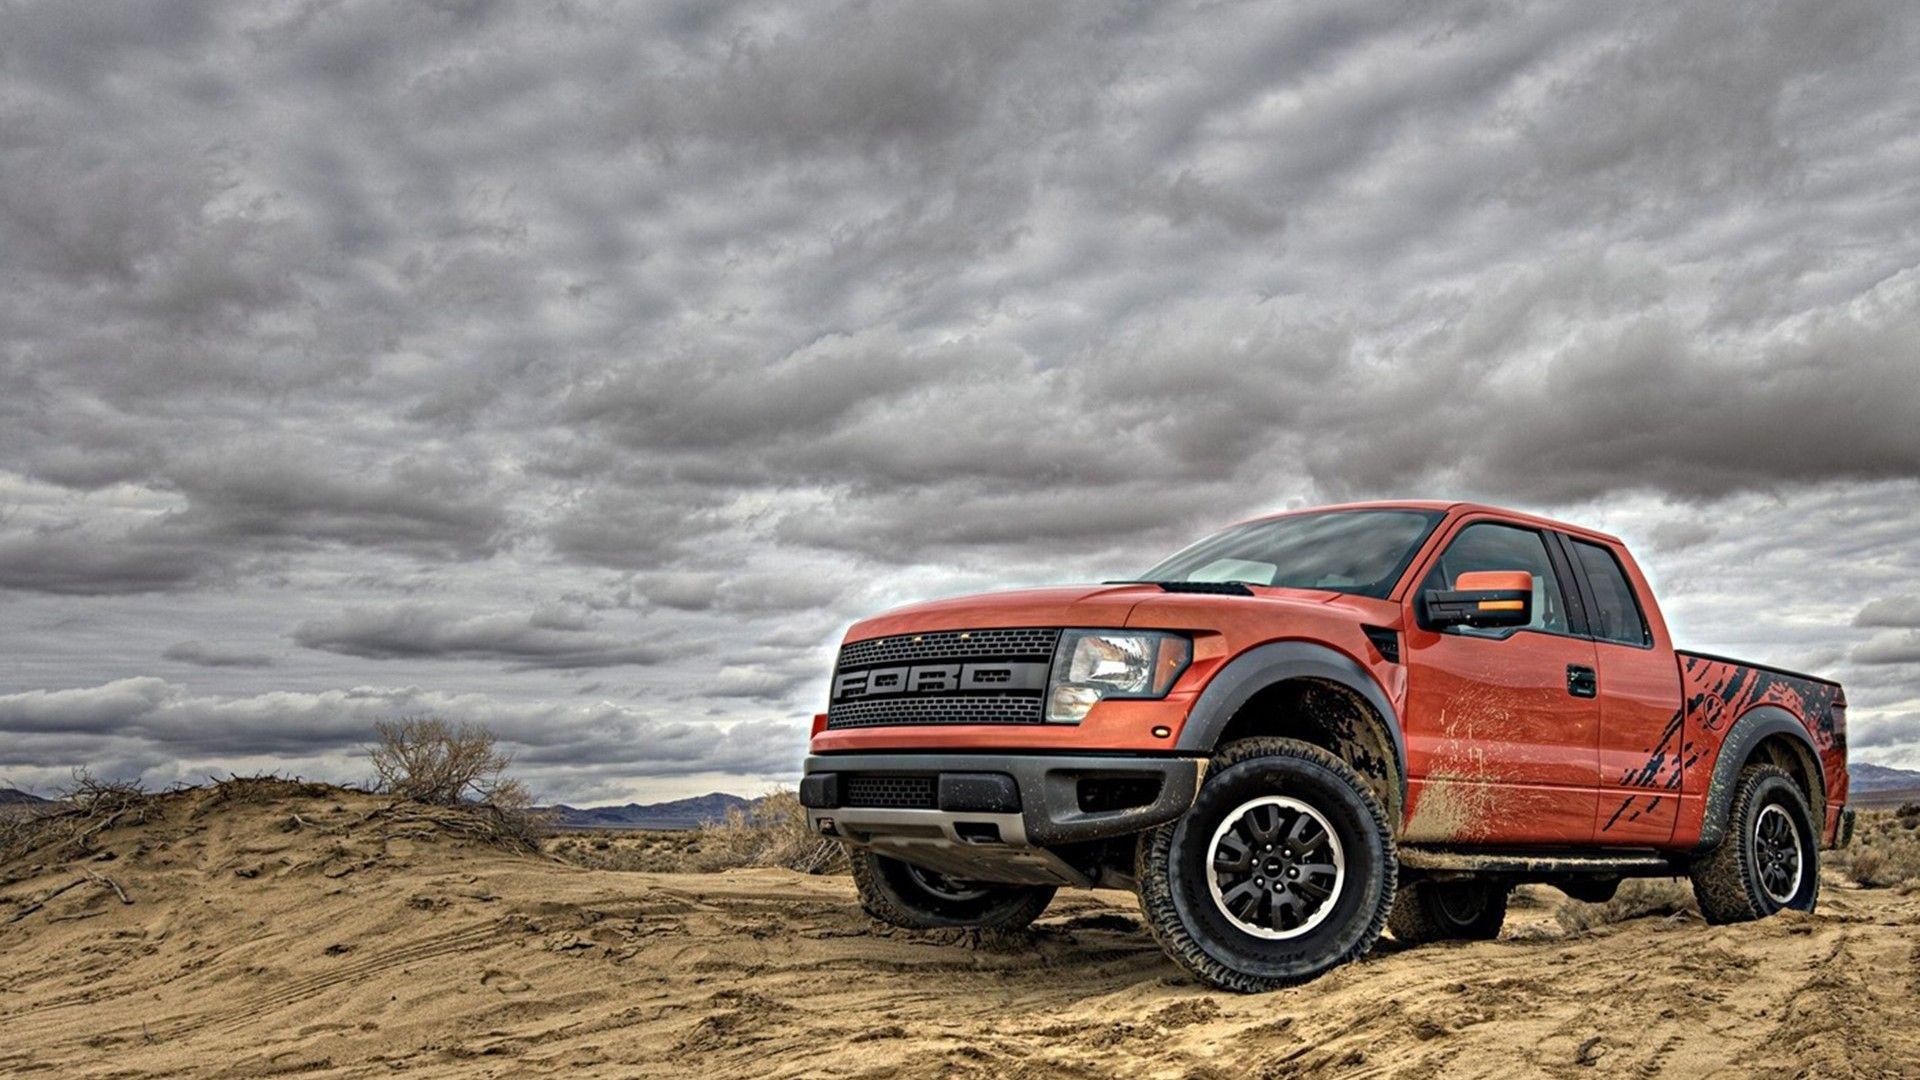 Ford F150 Wallpapers Wallpaper Cave